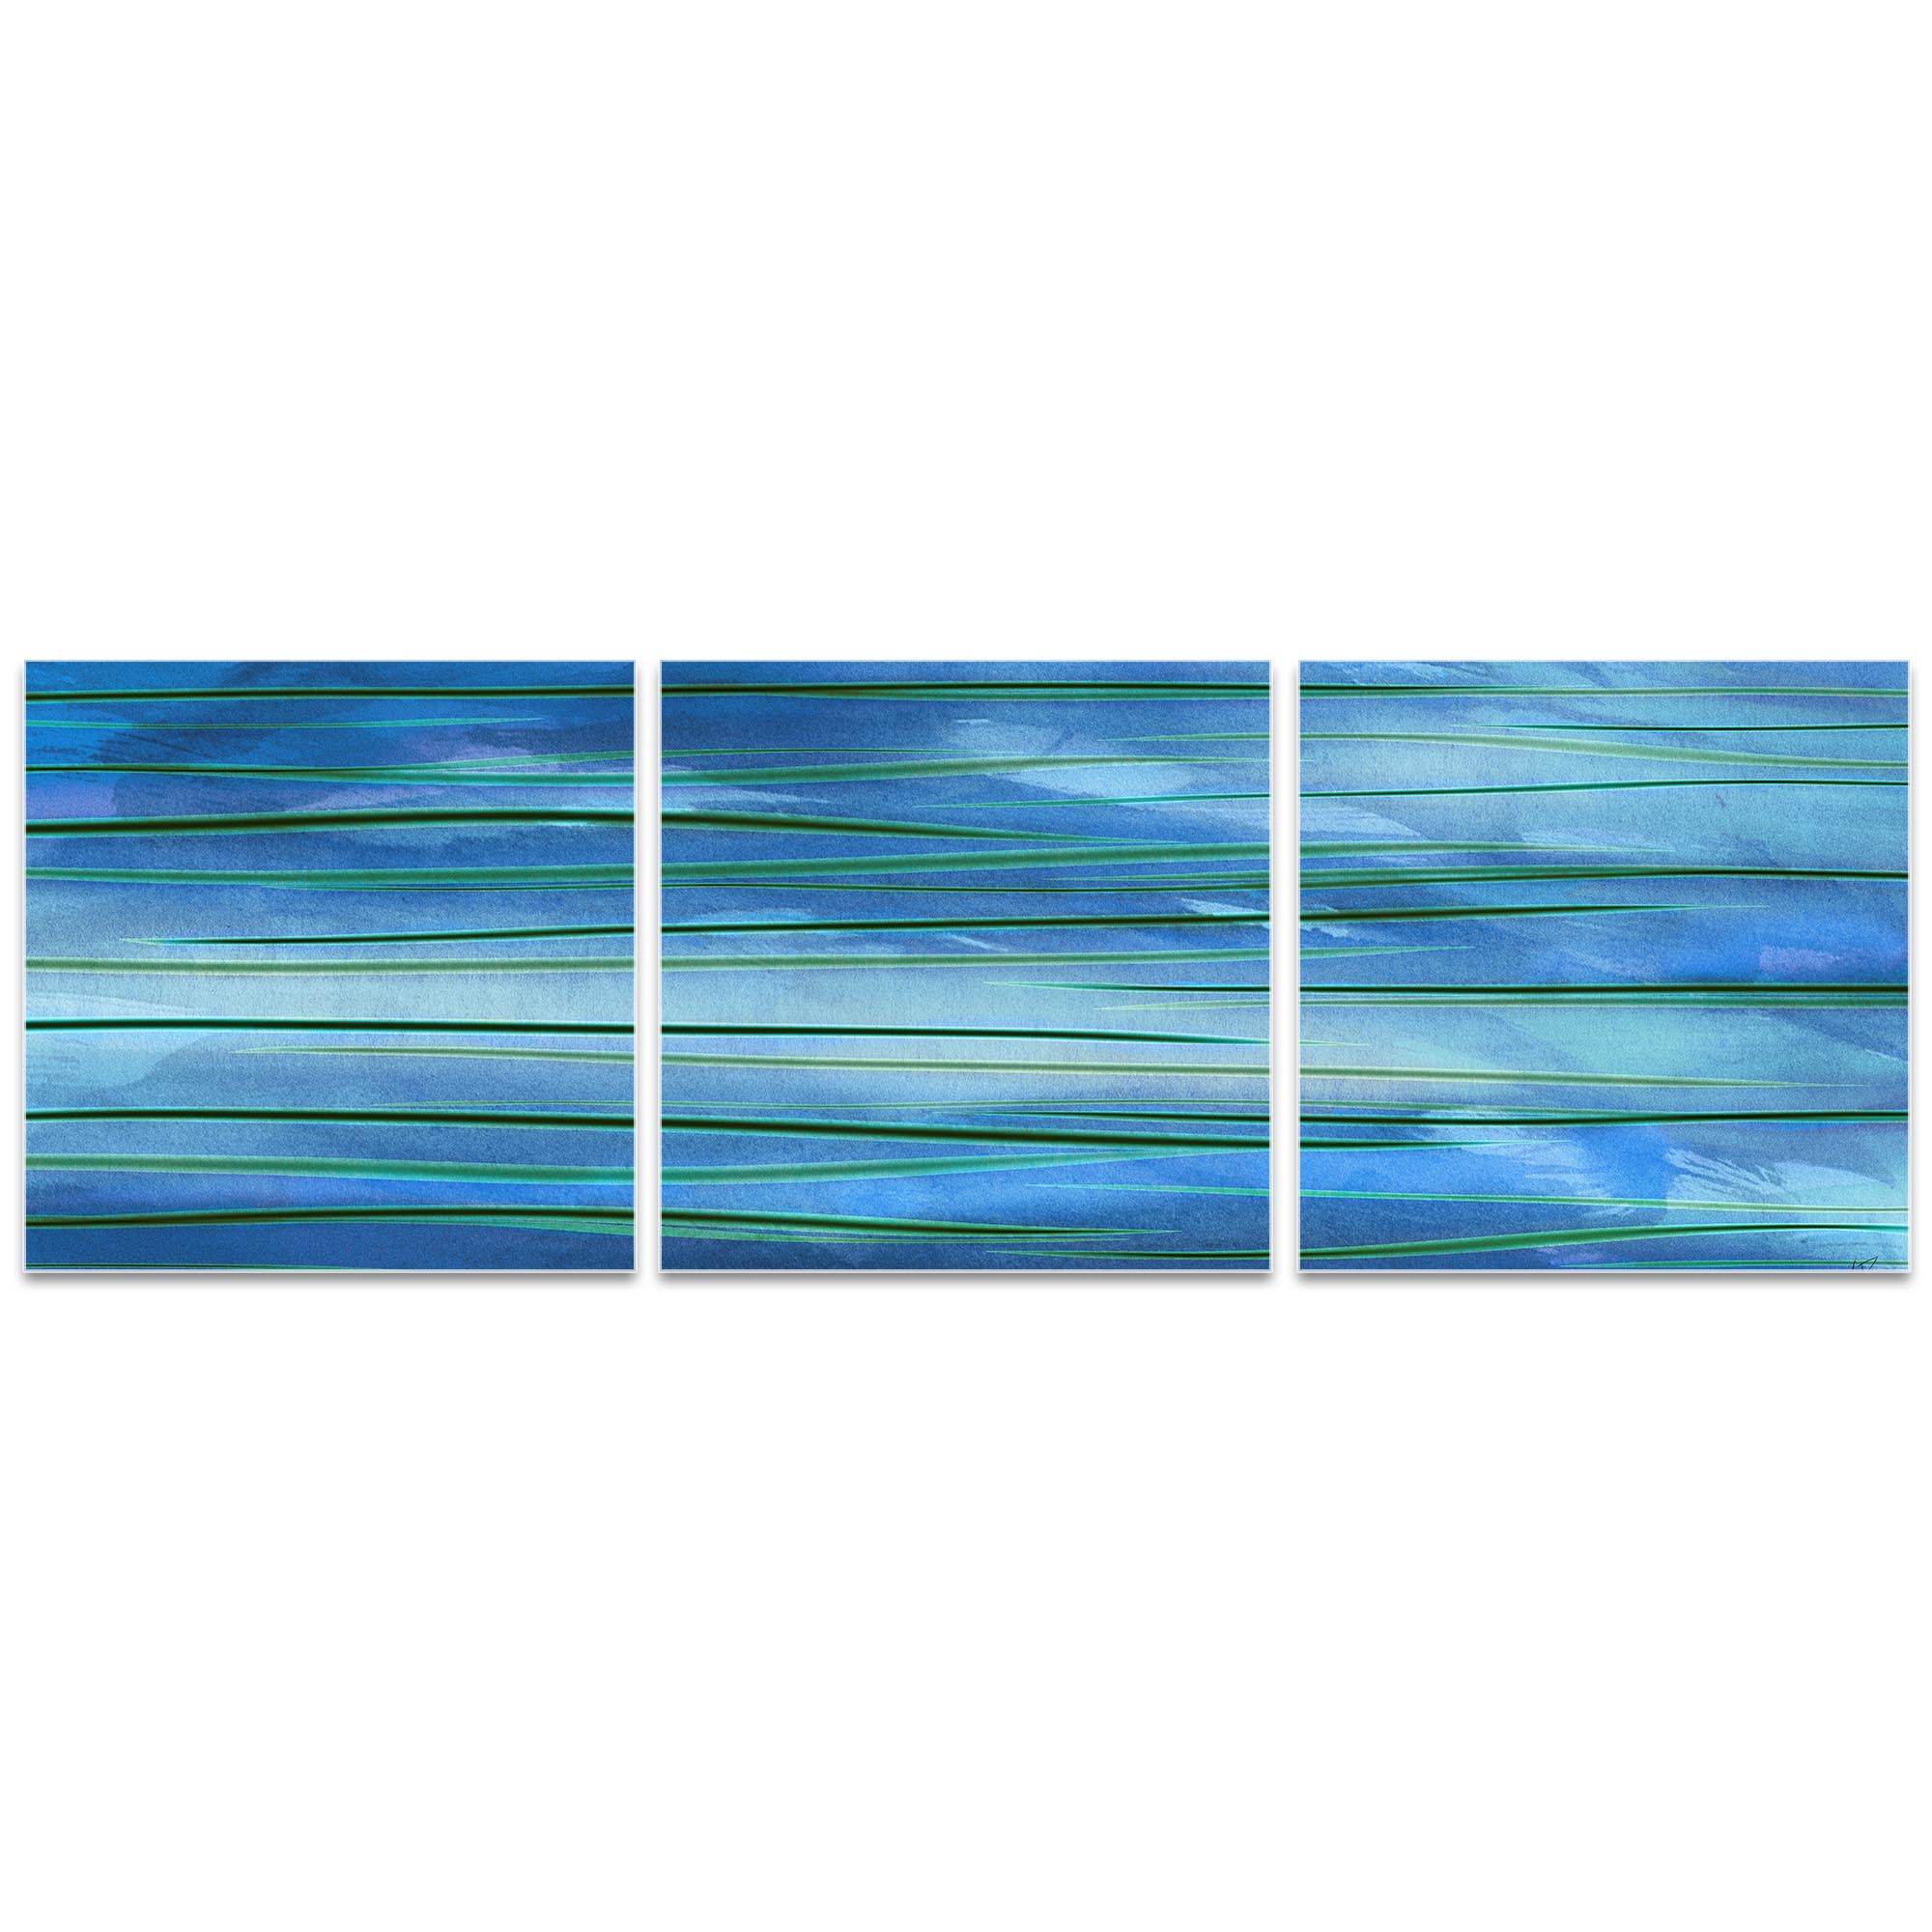 Ocean View Triptych Large 70x22in. Metal or Acrylic Abstract Decor - Image 2